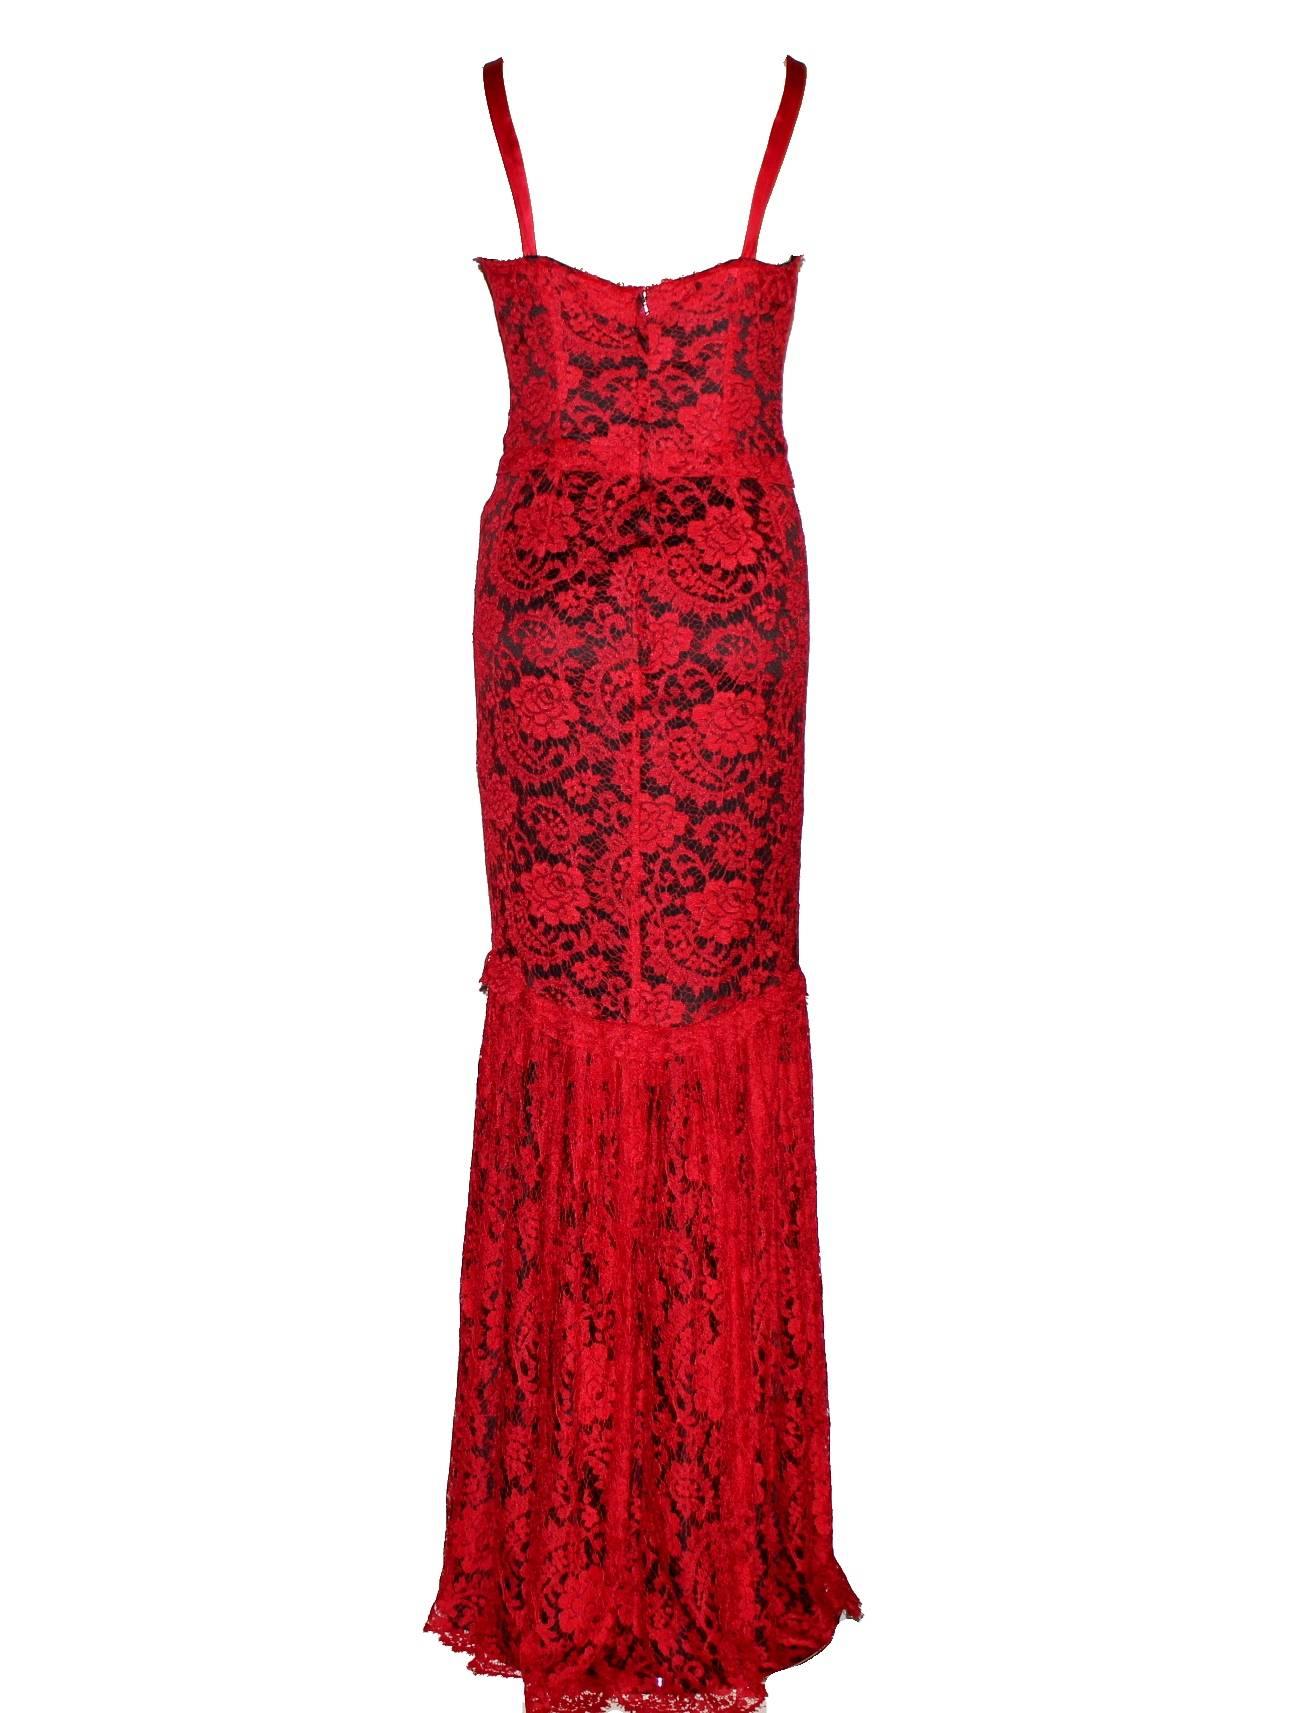 GORGEOUS DOLCE & GABBANA RED LACE EVENING GOWN

    A DOLCE & GABBANA piece that will last you for years
    Made out of lustrous black silk with beautiful red lace ontop
    Boned bodice
    Dropped waist
    Gathered skirt
    Hook